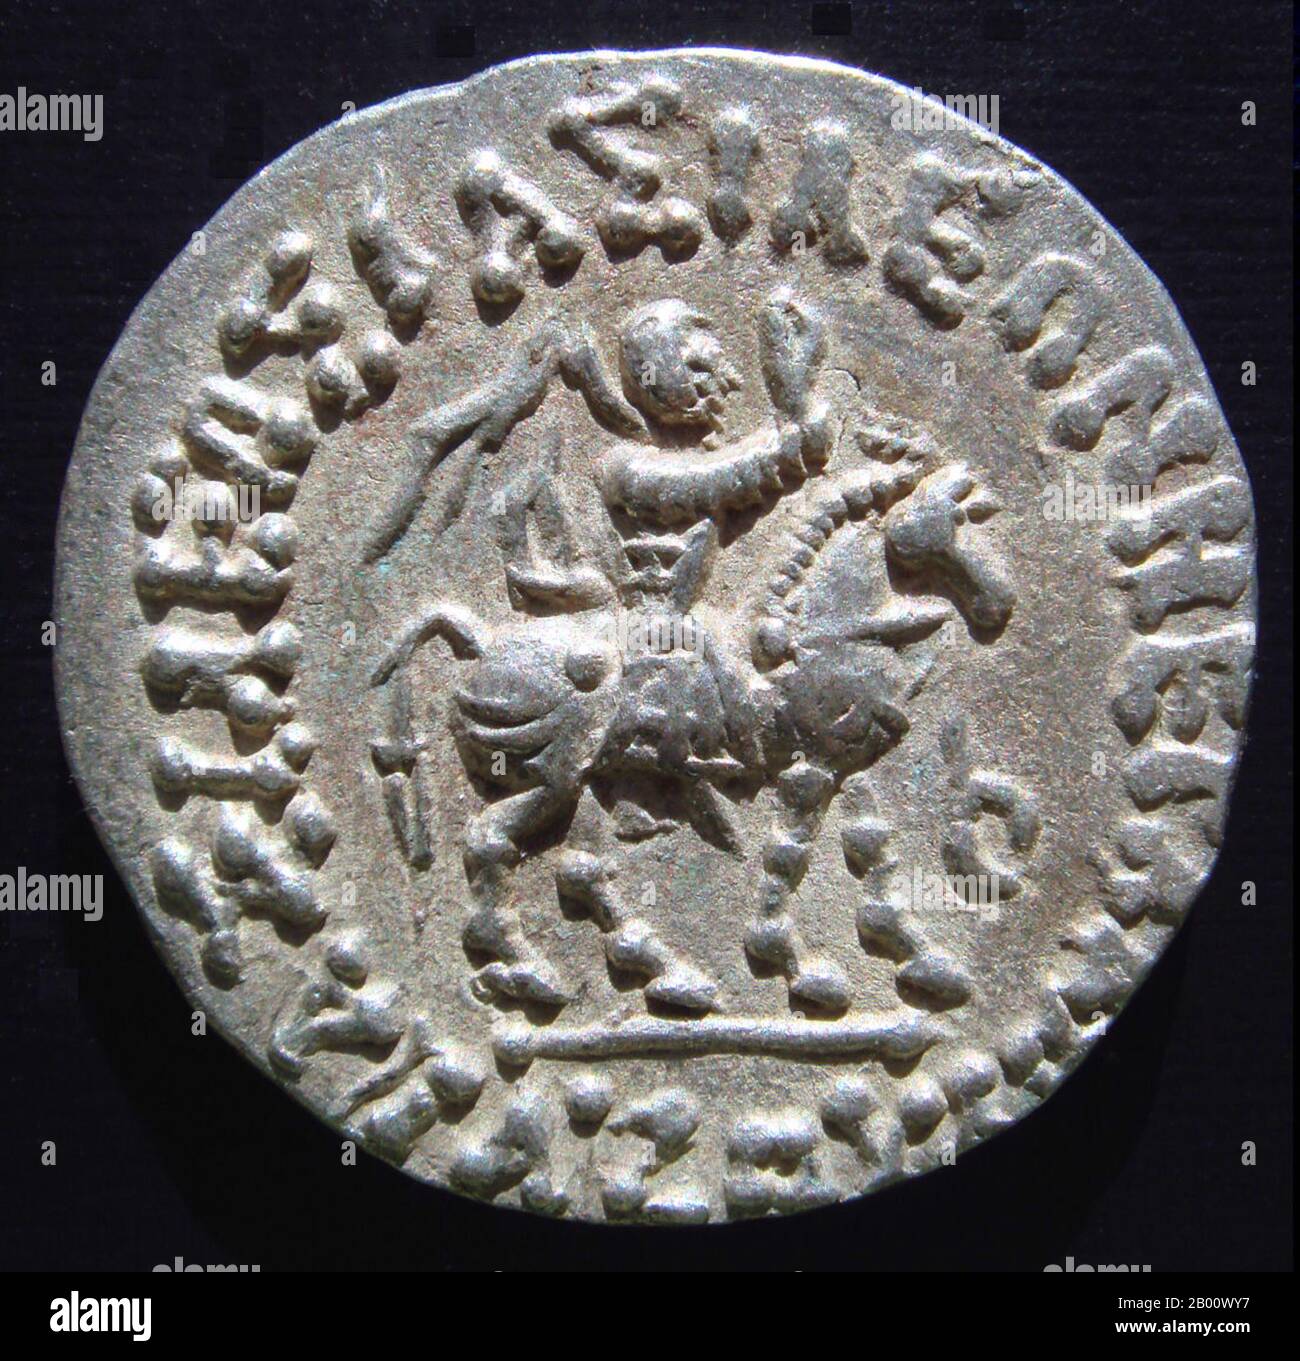 India: Azes II in armour, riding a horse, on one of his silver tetradrachms, minted in Gandhara.  Azes II (reigned circa 35-12 BCE), may have been the last Indo-Scythian king in northern India. After the death of Azes II, the rule of the Indo-Scythians in northwestern India finally crumbled with the conquest of the Kushans, one of the five tribes of the Yuezhi who had lived in Bactria for more than a century, and who were then expanding into India to create a Kushan Empire. Stock Photo